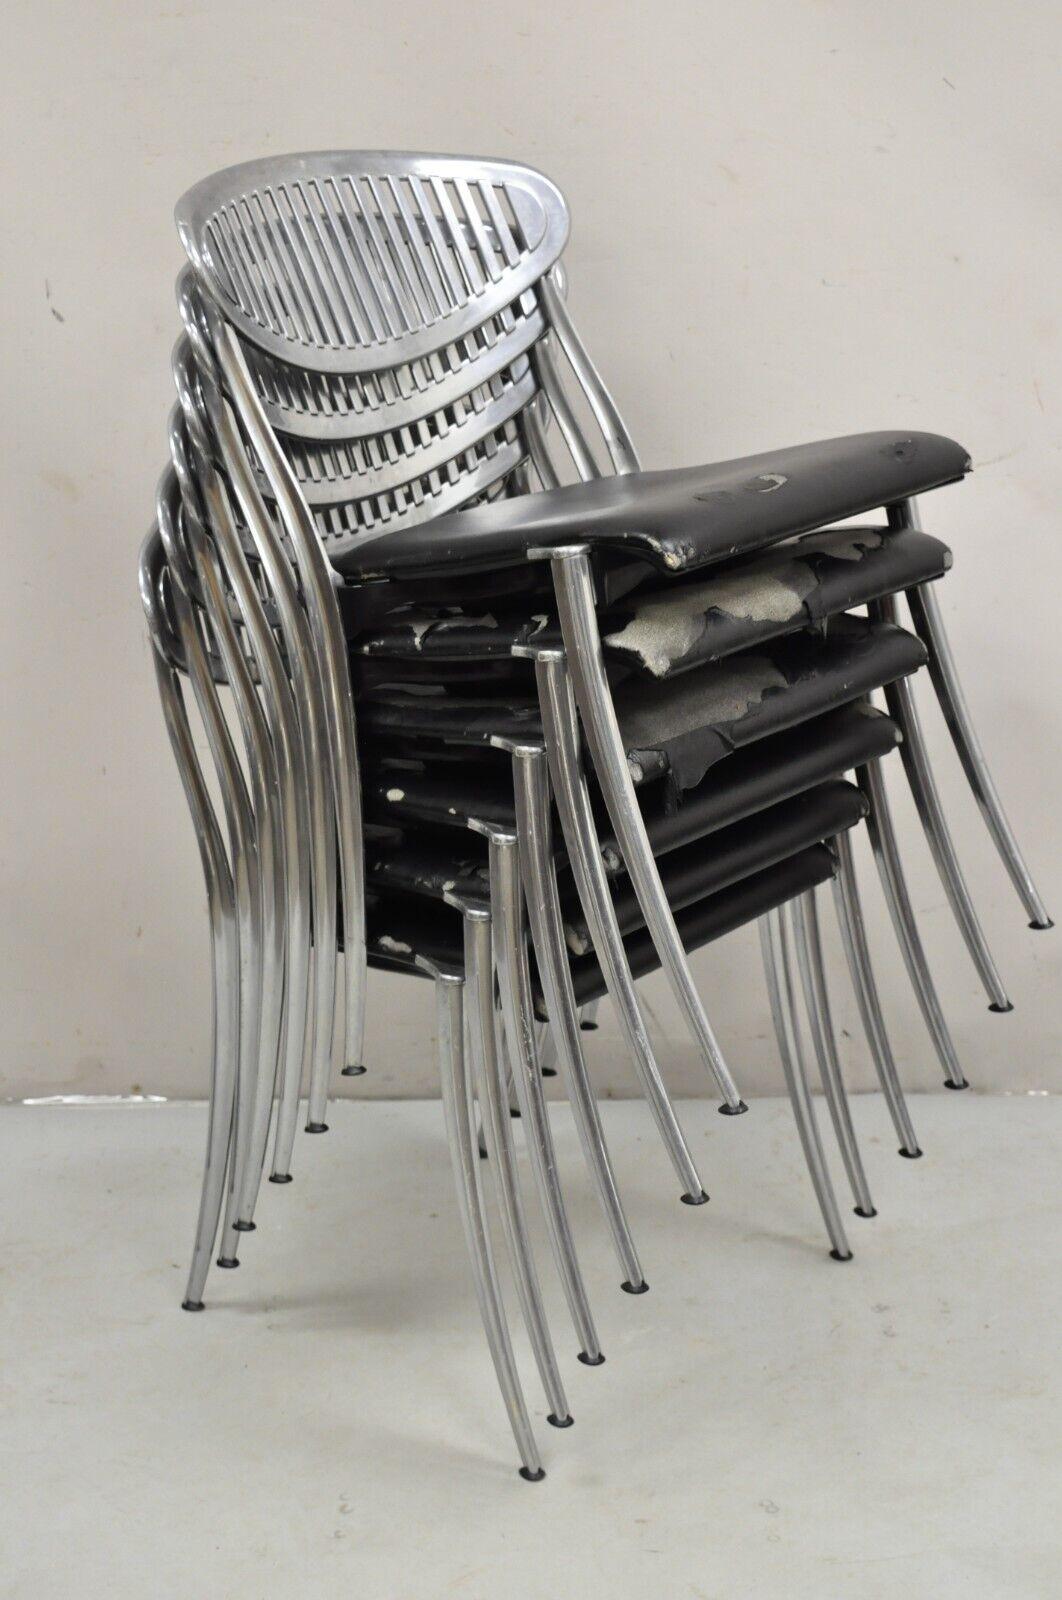 Vintage Coro Luigi Origlia designed Italian Modern Sculptted Aluminum Dining Chairs with Stackable Frames - Set of 6. Circa 1980. Dimensions : 31